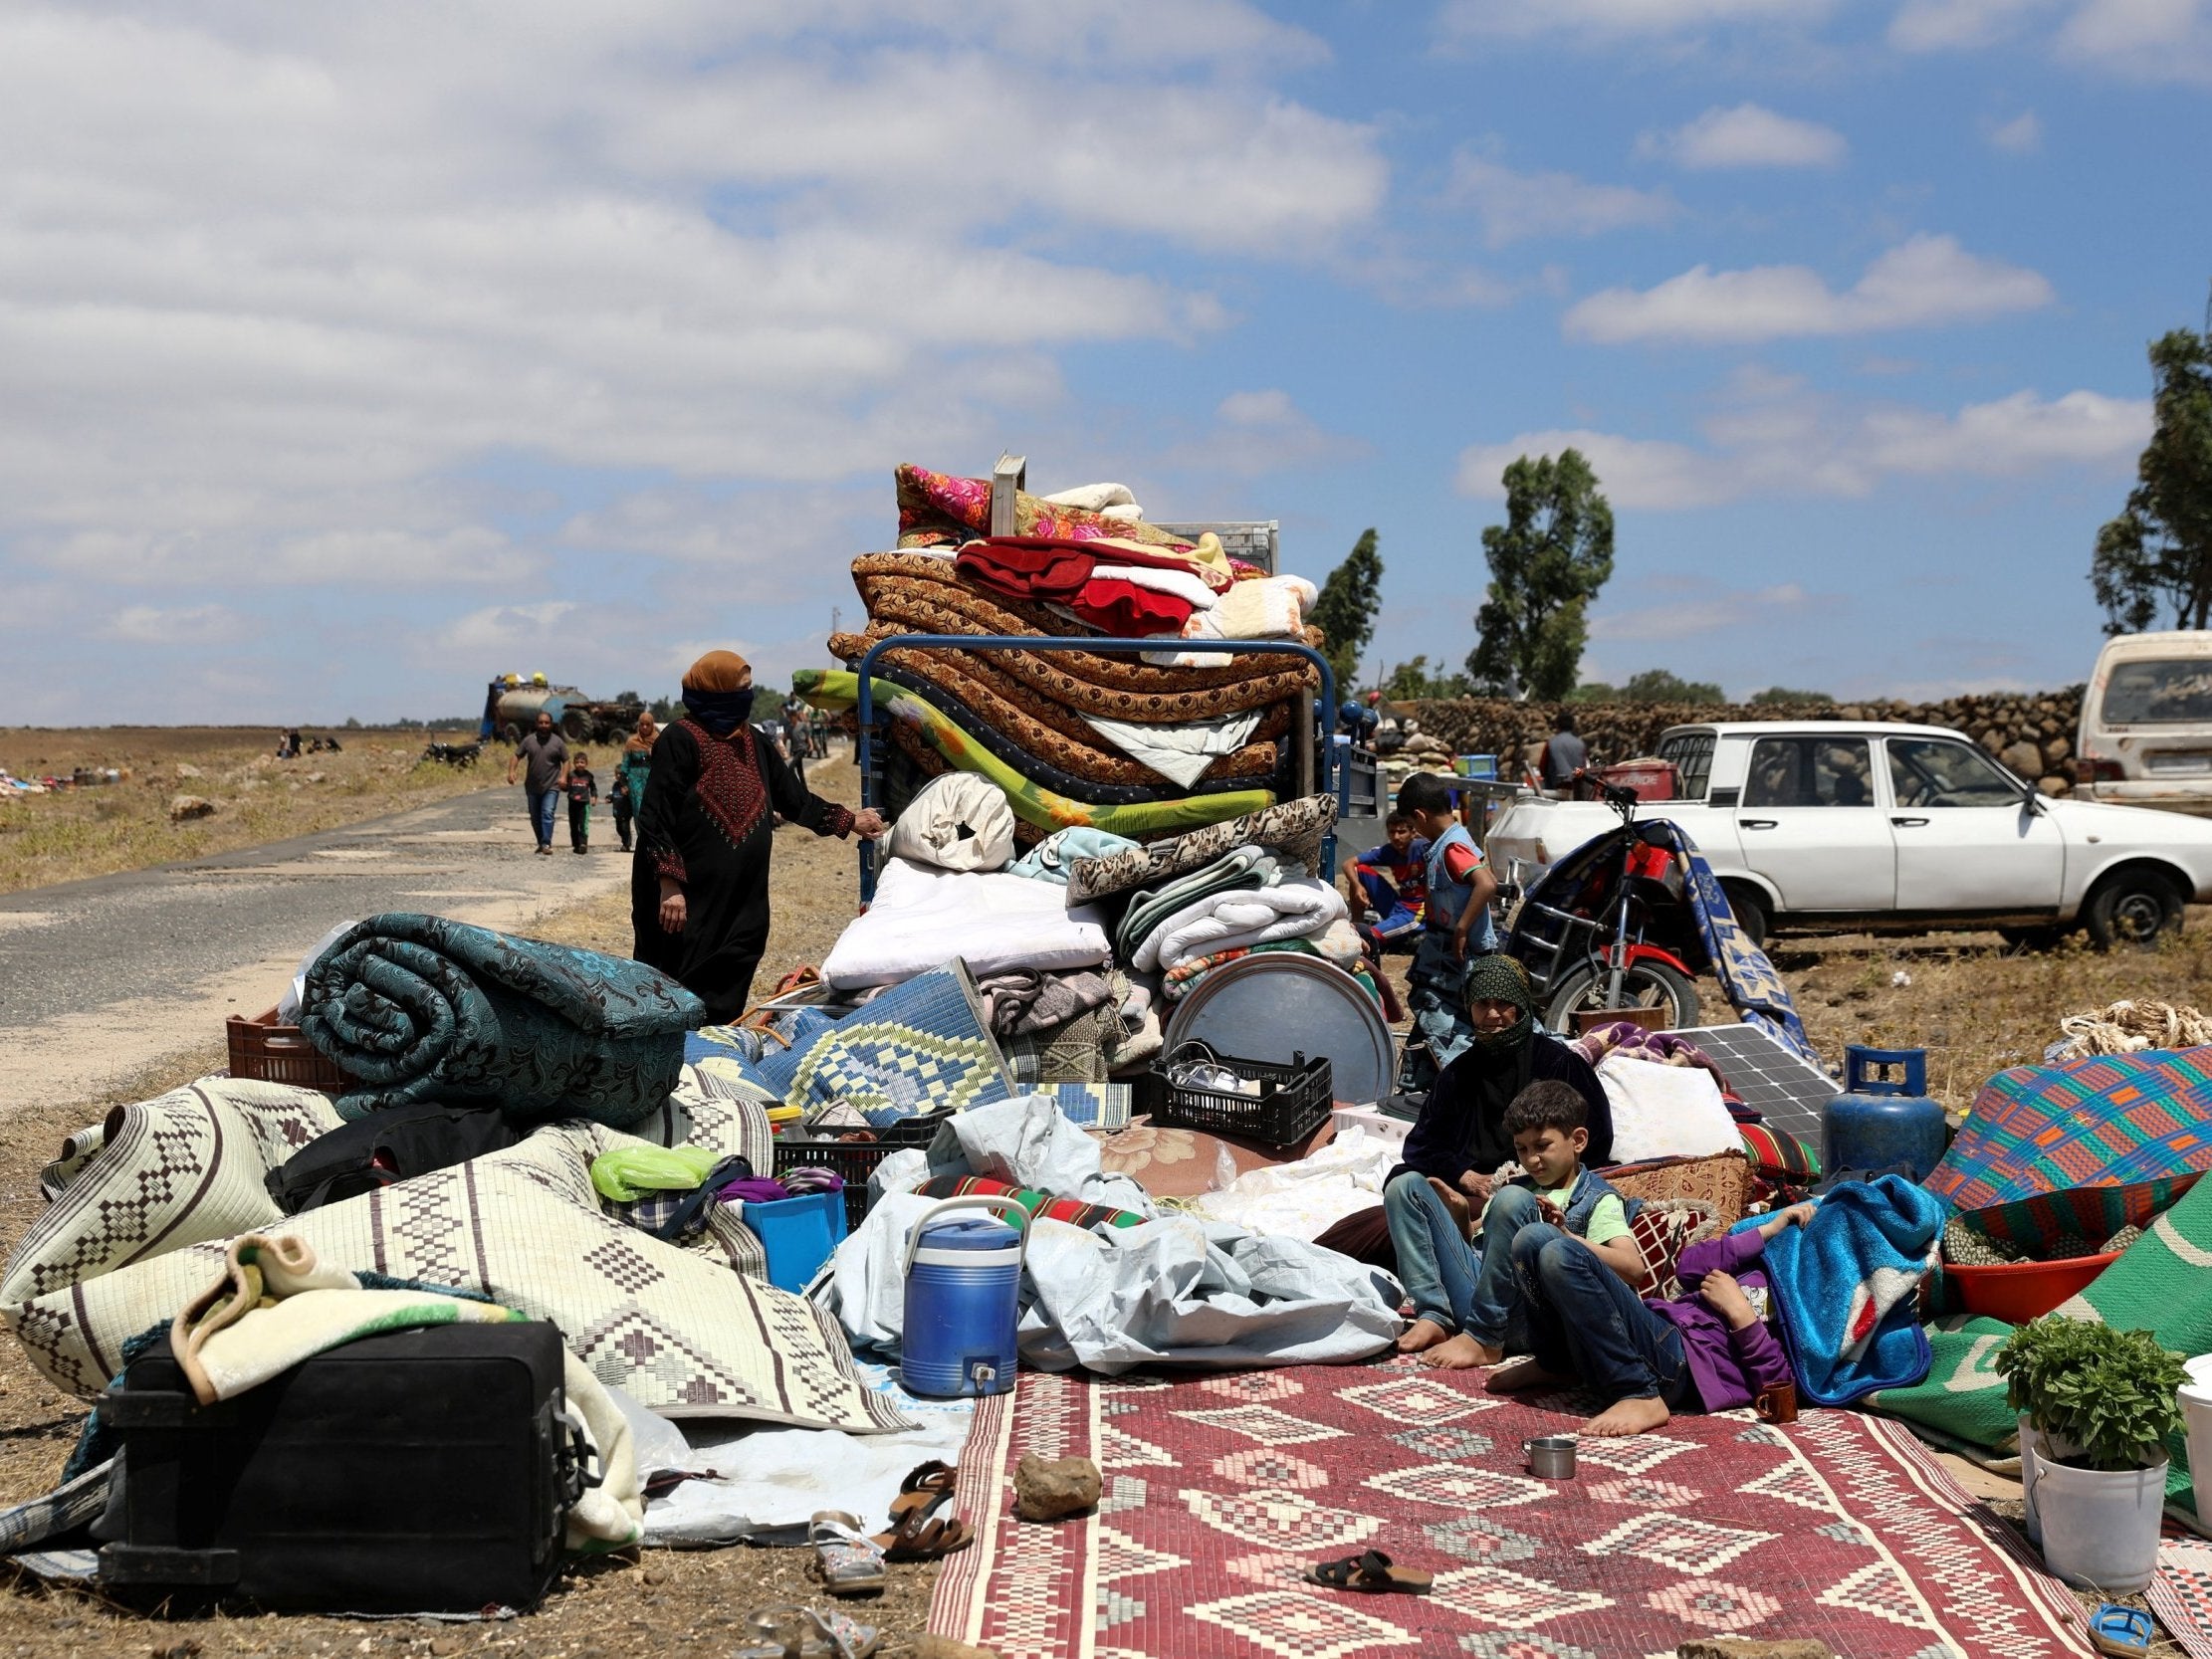 People from Deraa with their belongings near the Israeli-occupied Golan Heights in Quneitra